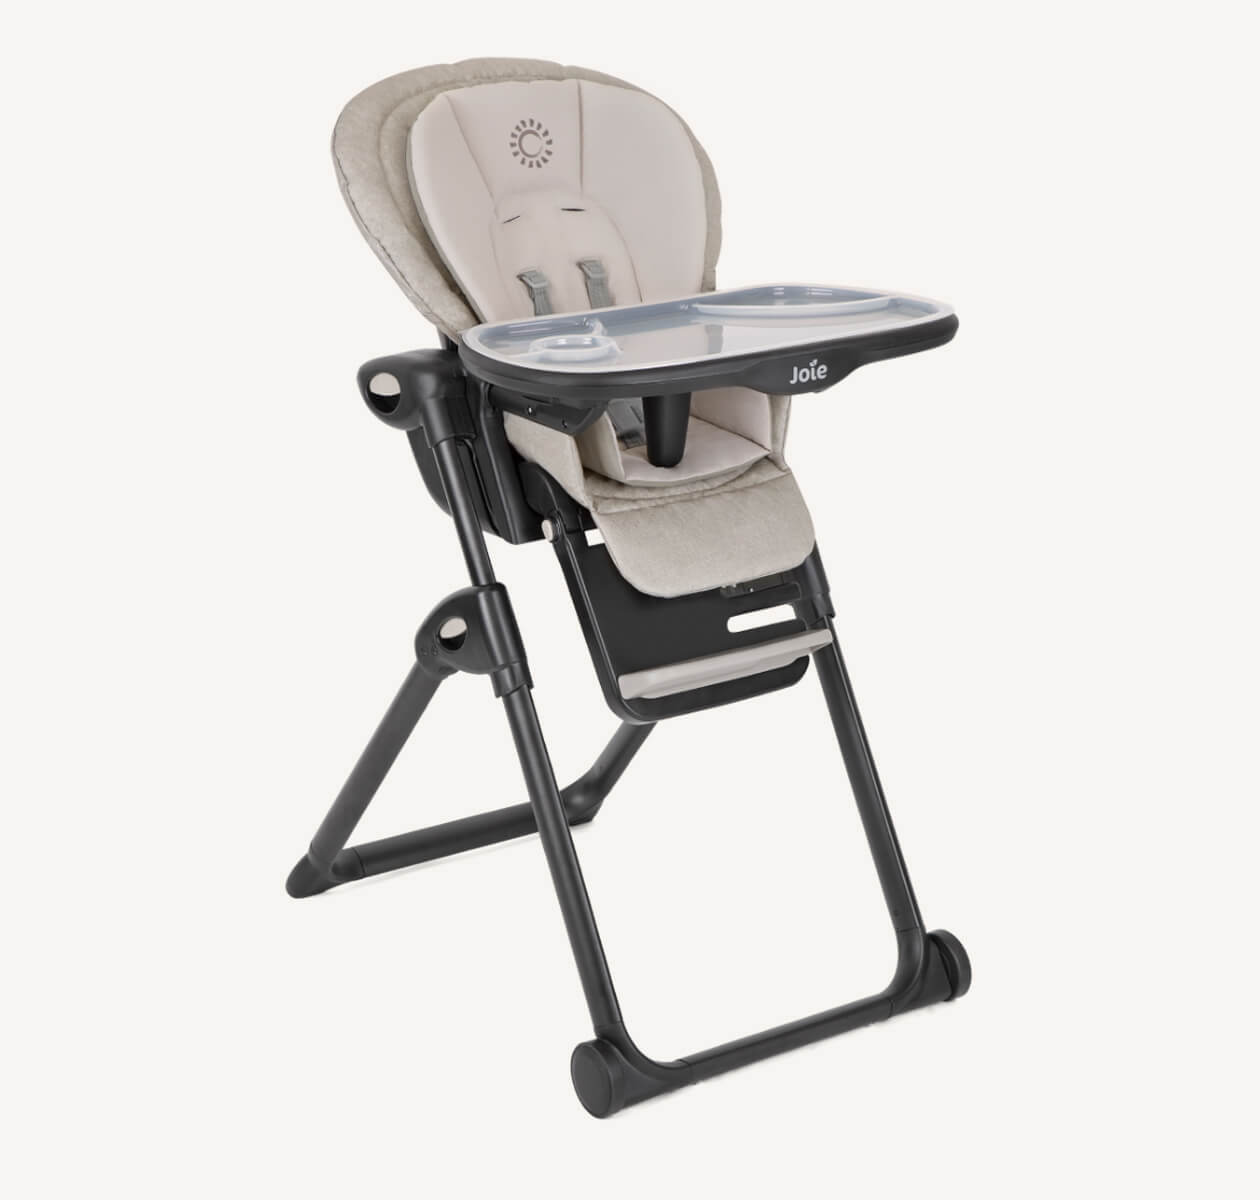 Joie Mimzy Recline highchair with a black frame and tan seat pad, facing at an angle to the right.